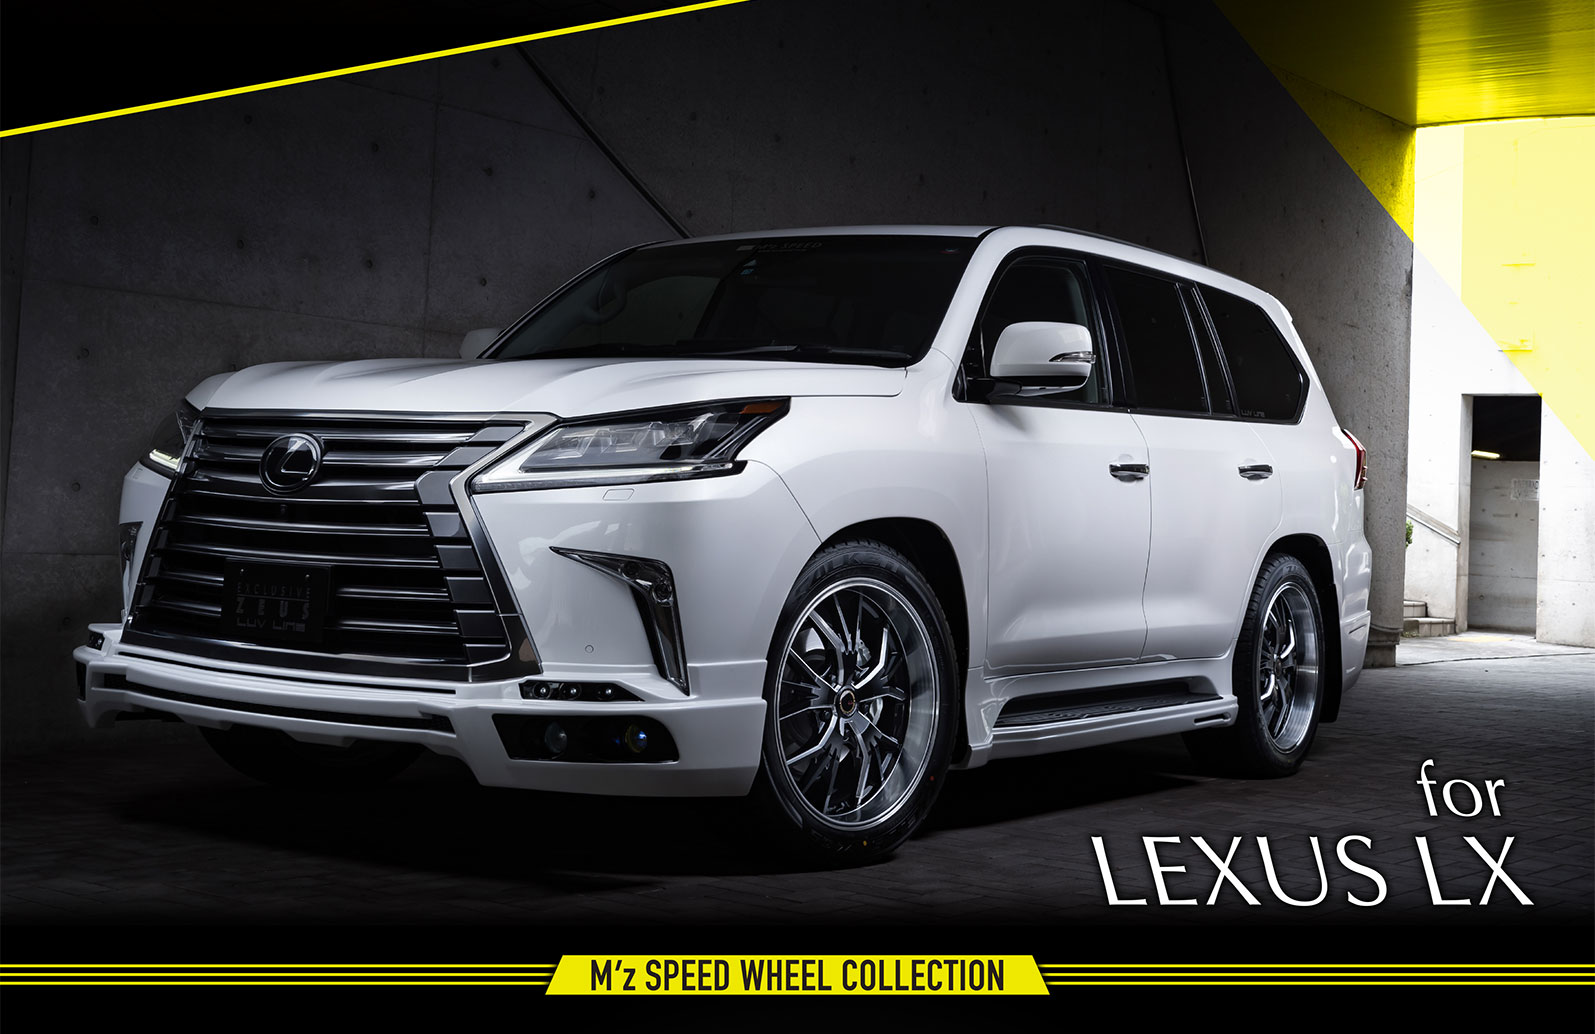 for LEXUS LX M’z SPEED WHEEL COLLECTION